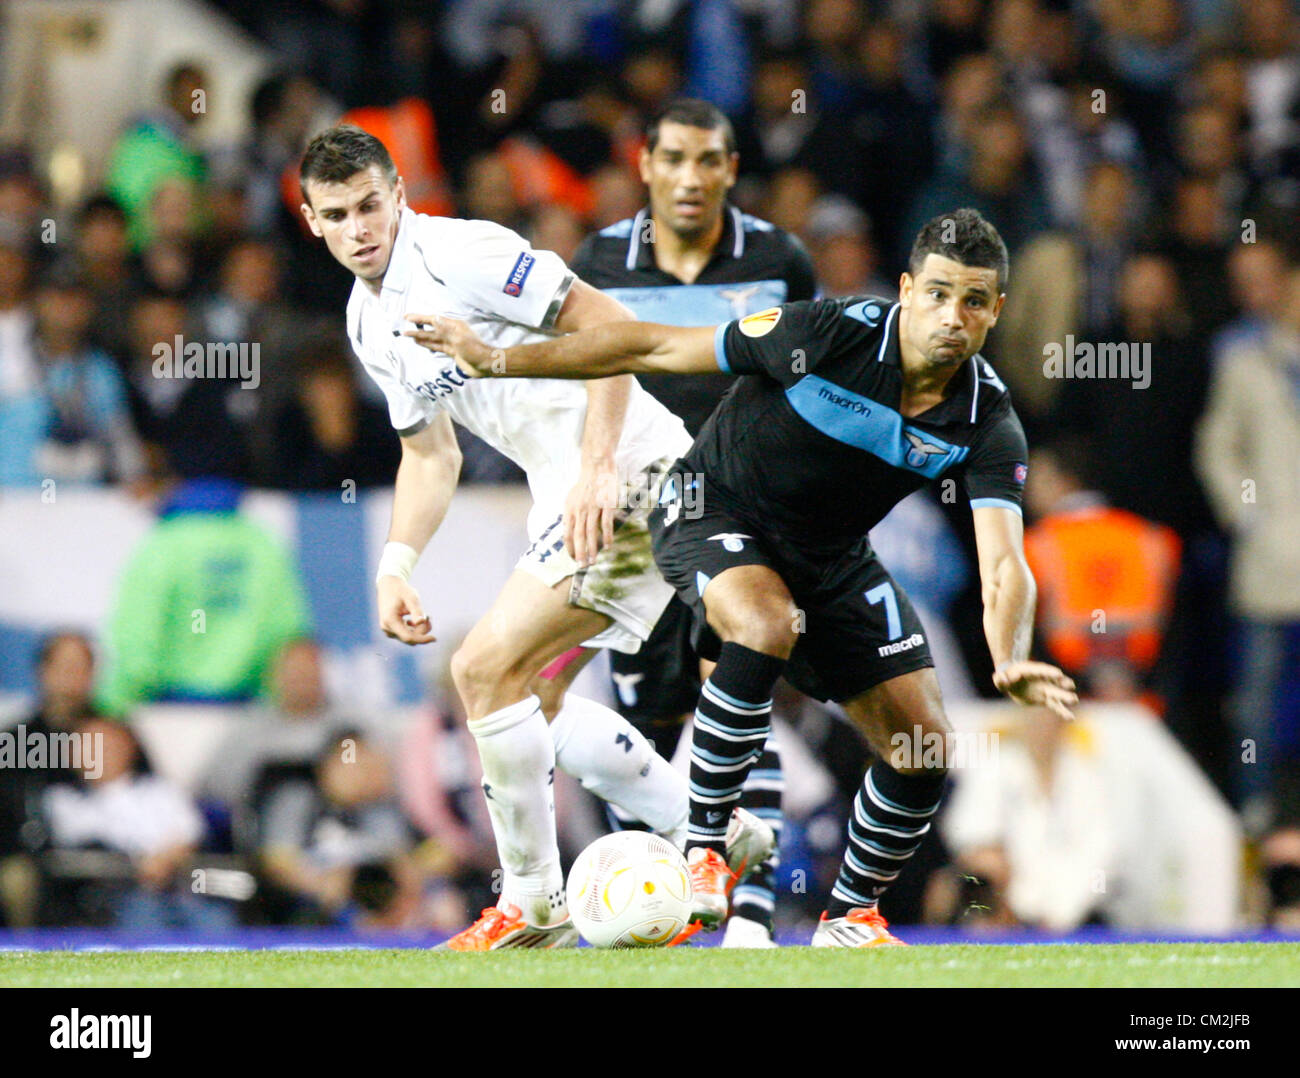 20.09.2012 London, ENGLAND:  Ederson of S.S. Lazio and Gareth Bale of Tottenham Hotspur in action during the Europa League Group J match between Tottenham Hotspur and SS Lazio at White Hart Lane Stadium Stock Photo